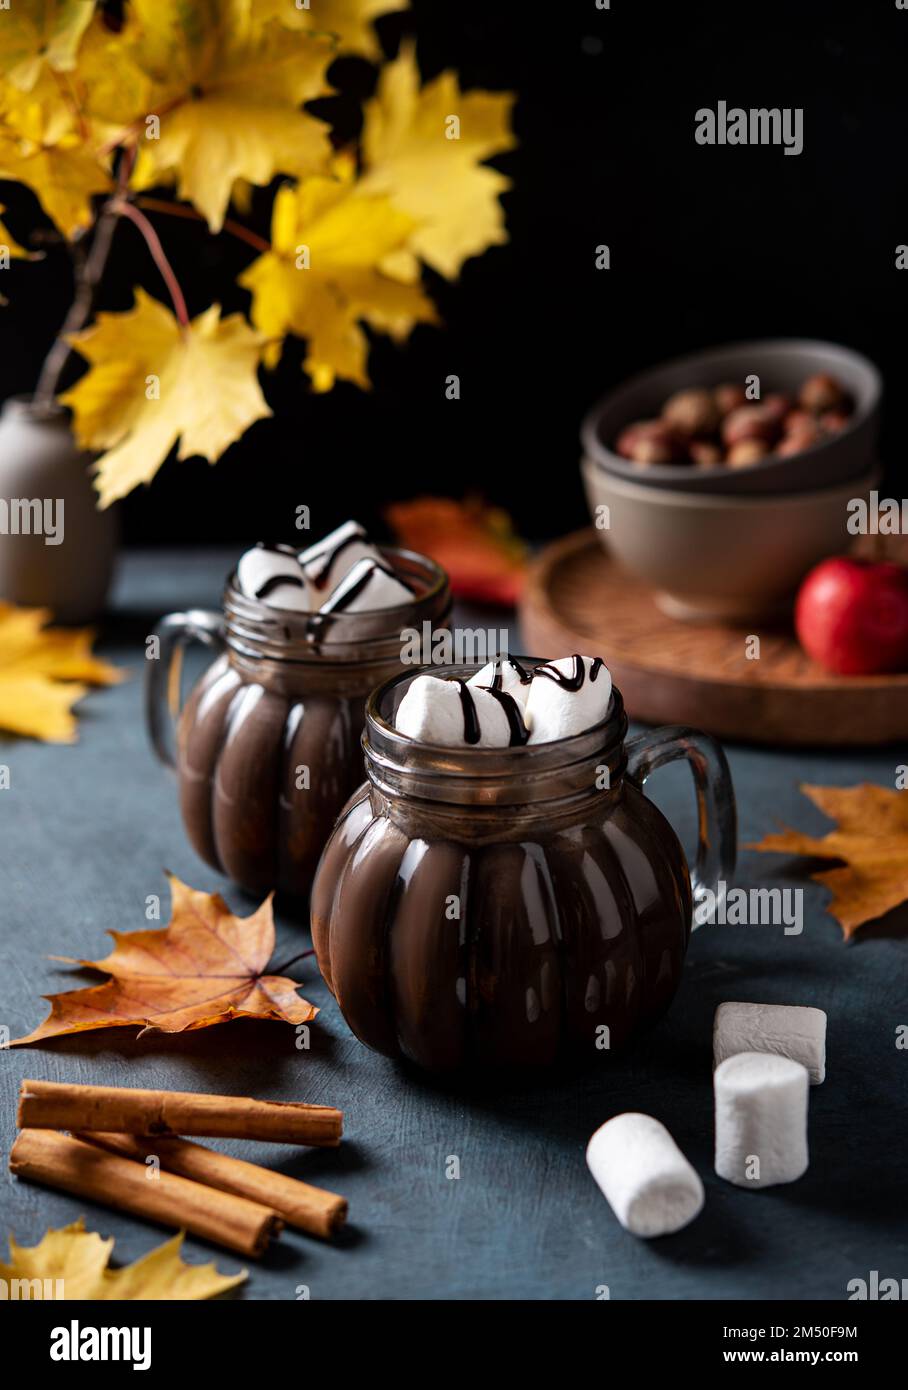 Two cups of aroma hot chocolate with marshmallows on a dark background with autumn maple leaves. Concept cozy drink. Front view and close up. Stock Photo